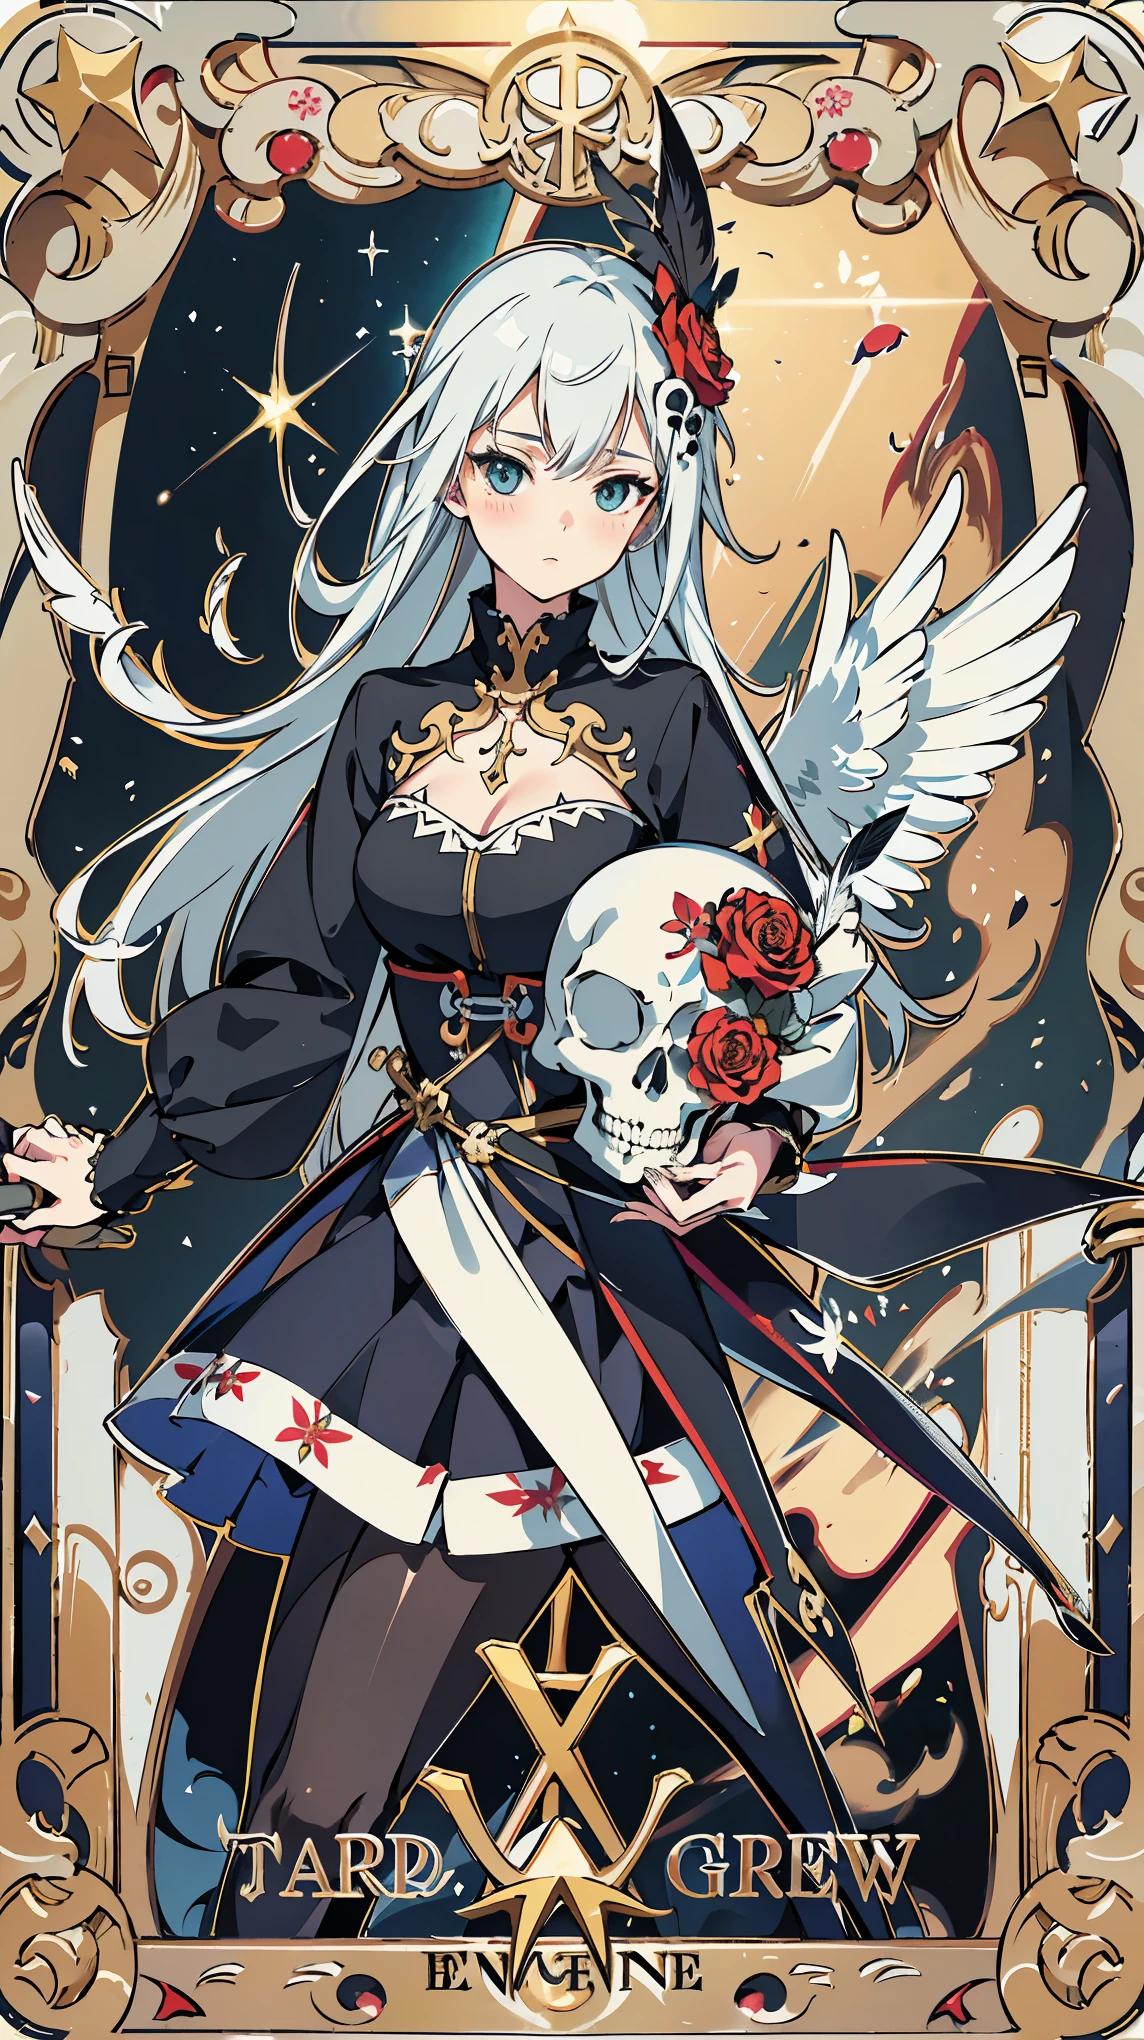 (highest quality, 4k, High resolution, masterpiece:1.2), Super detailed, anime style:1.37, pop art, Delicately painted face, Tarot Card Design, Grim reaper with a scythe, disaster々Shinigami figure, Skull mark, Beautiful detailed wings, dark color, distorted flowers, Fluttering feathers, sparkling background, Natural light, Illustration of movement, Blur, sur genuine, card design,